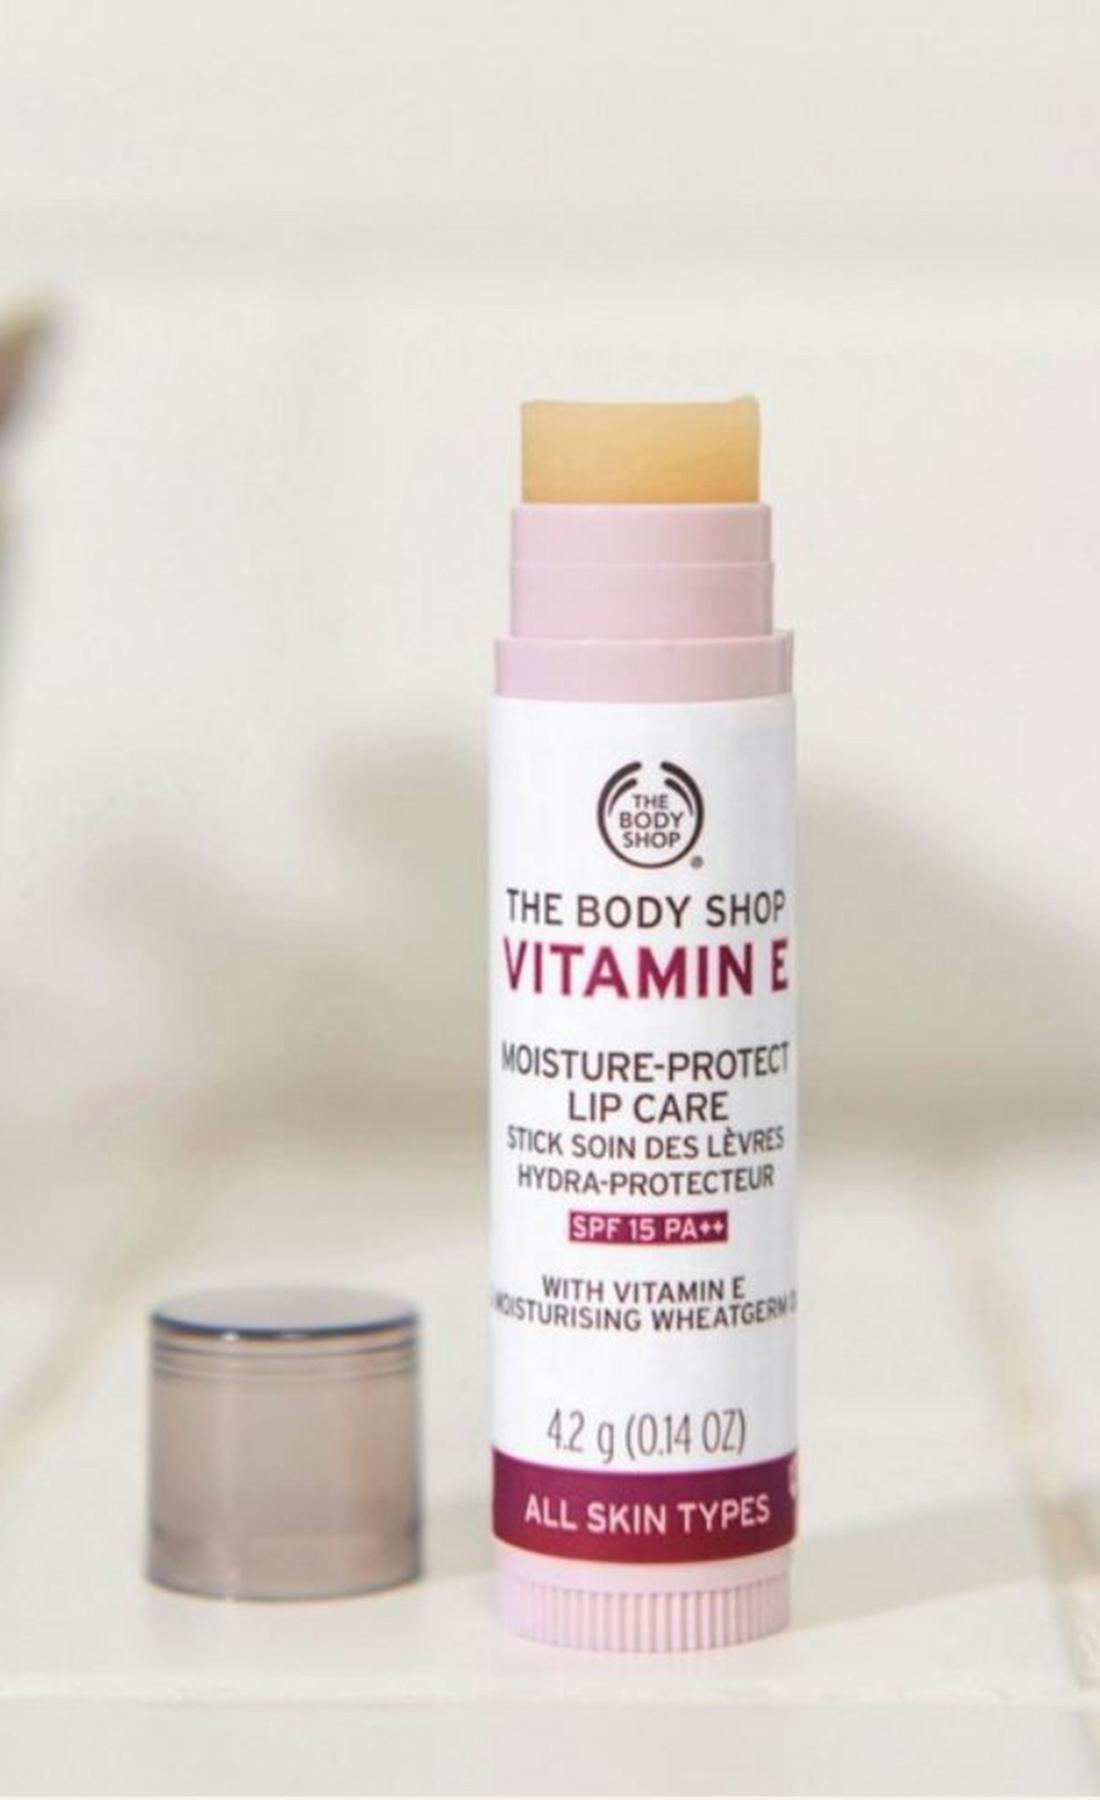 A pink tube of The Body Shops Vitamin E Moisture-Protect Lip Care with SPF 15.